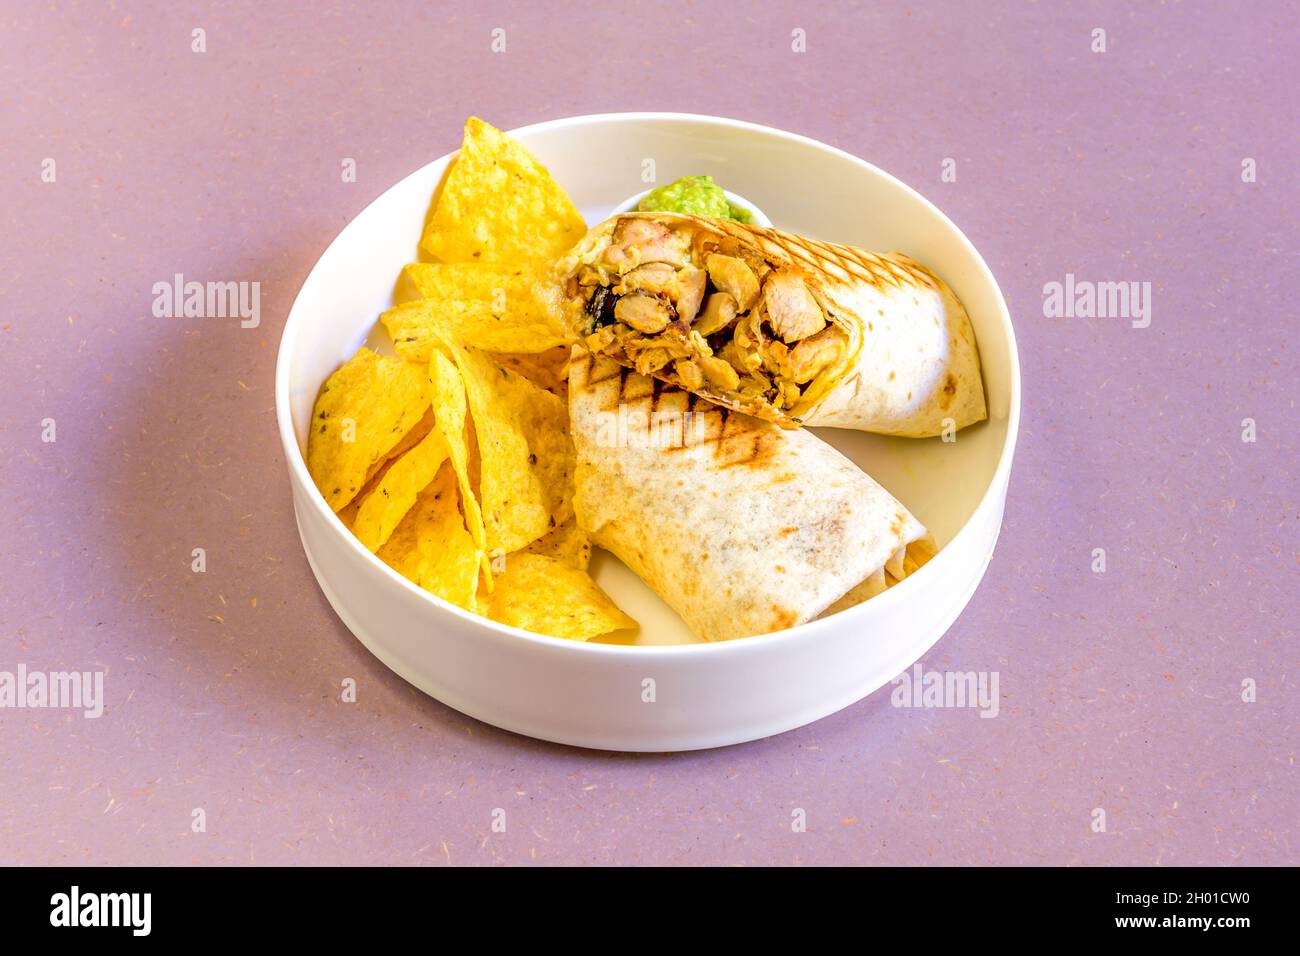 Chopped chicken wrap with sweet yellow curry sauce with corn chips Stock Photo